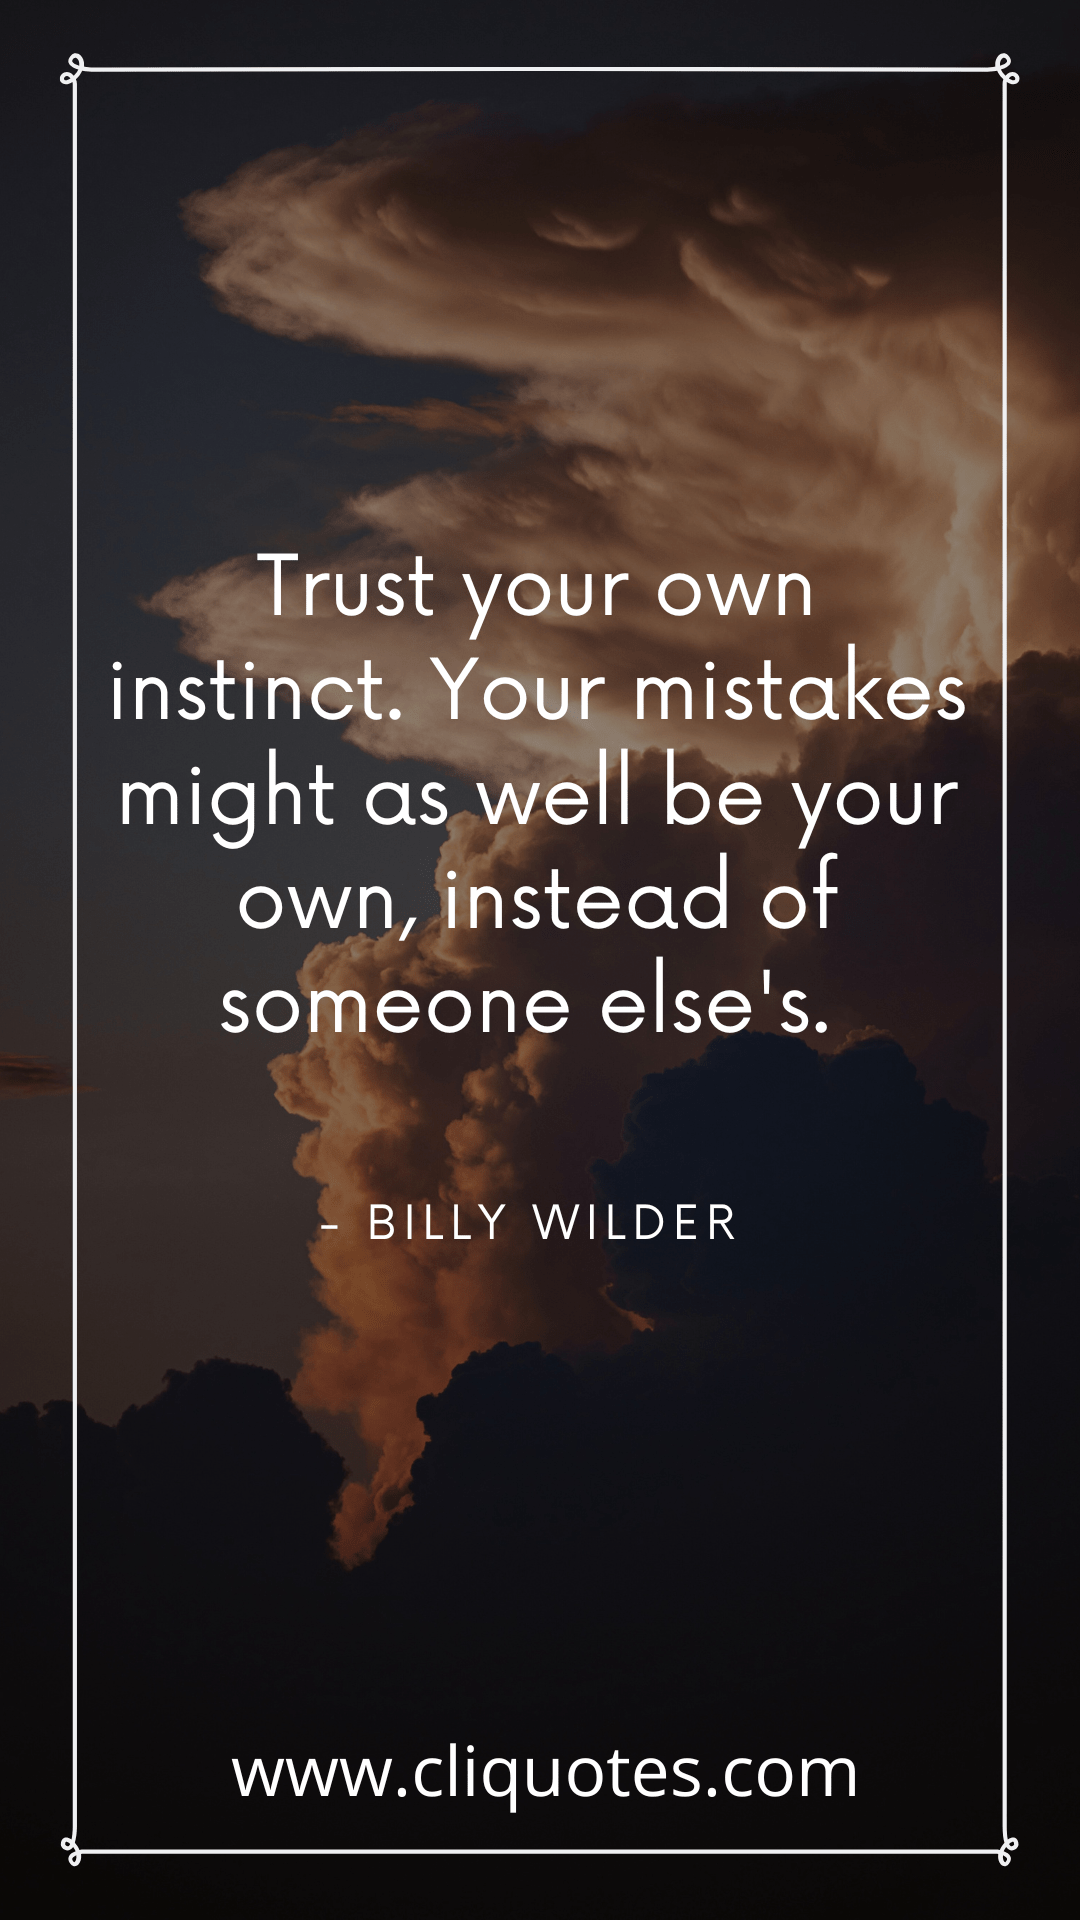 Trust your own instinct. Your mistakes might as well be your own, instead of someone else's. - Billy Wilder